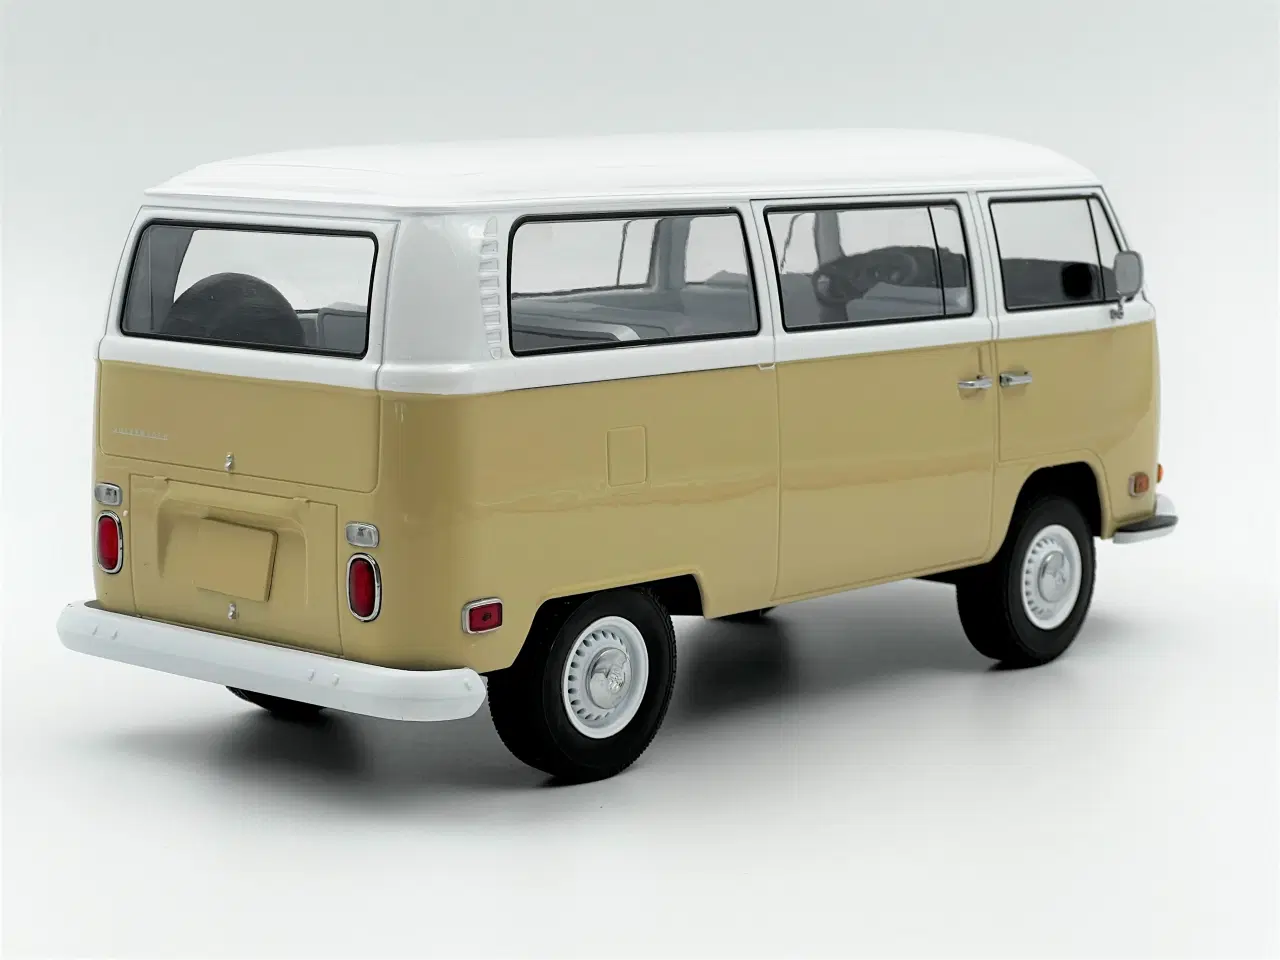 Billede 3 - 1971 VW T2a "Early Bay" Bus Limited Edition 1:18